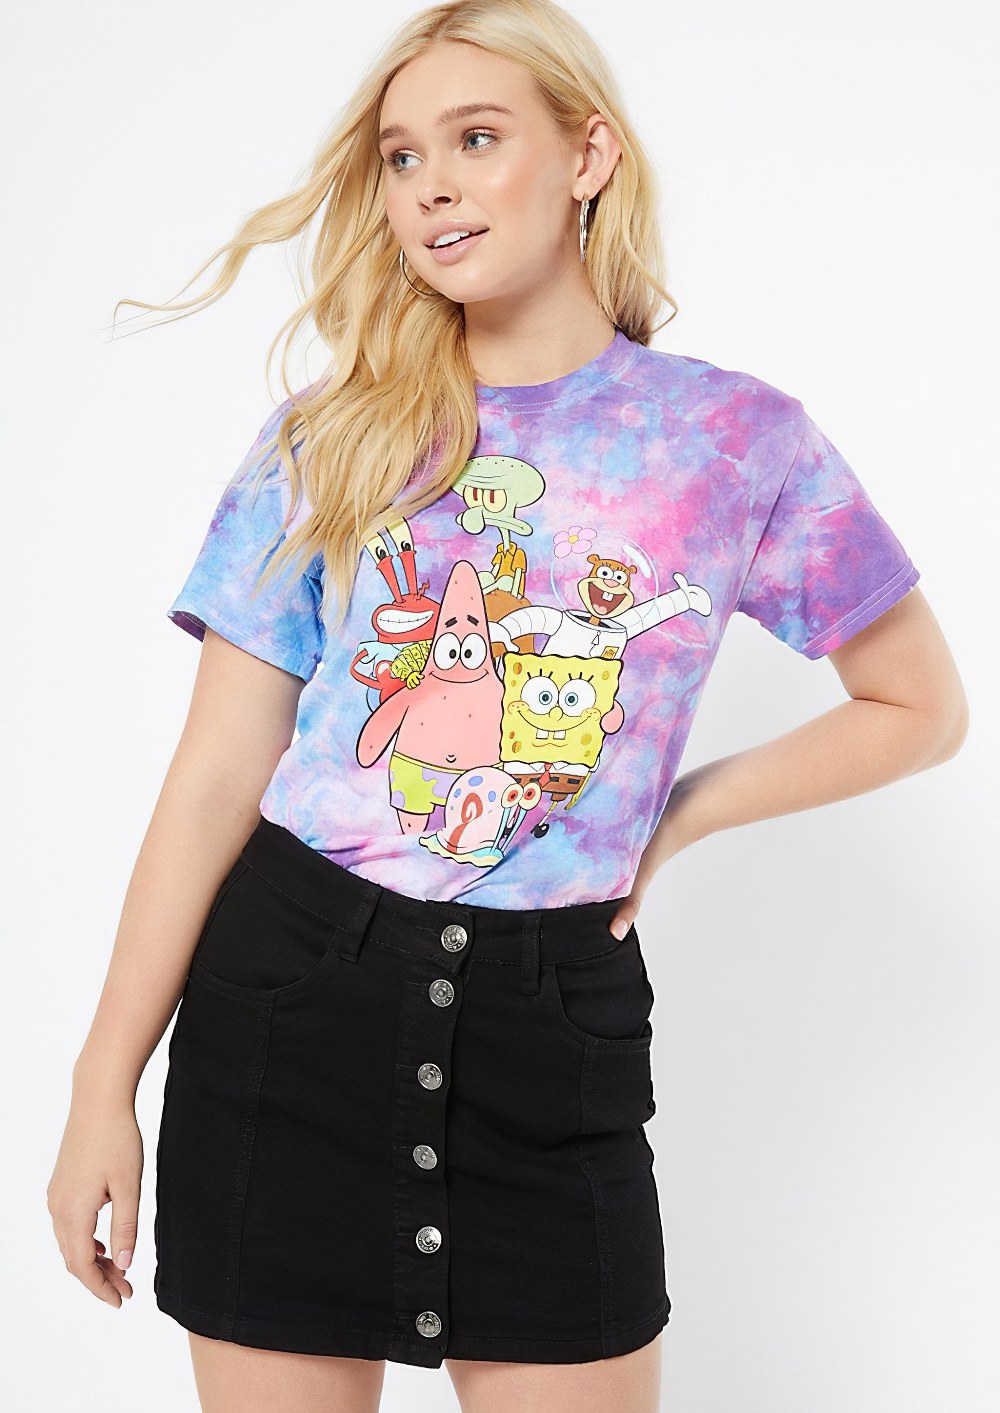 Gangster Spongebob With Friend 3d Shirt Multi Color Size Up To 5xl